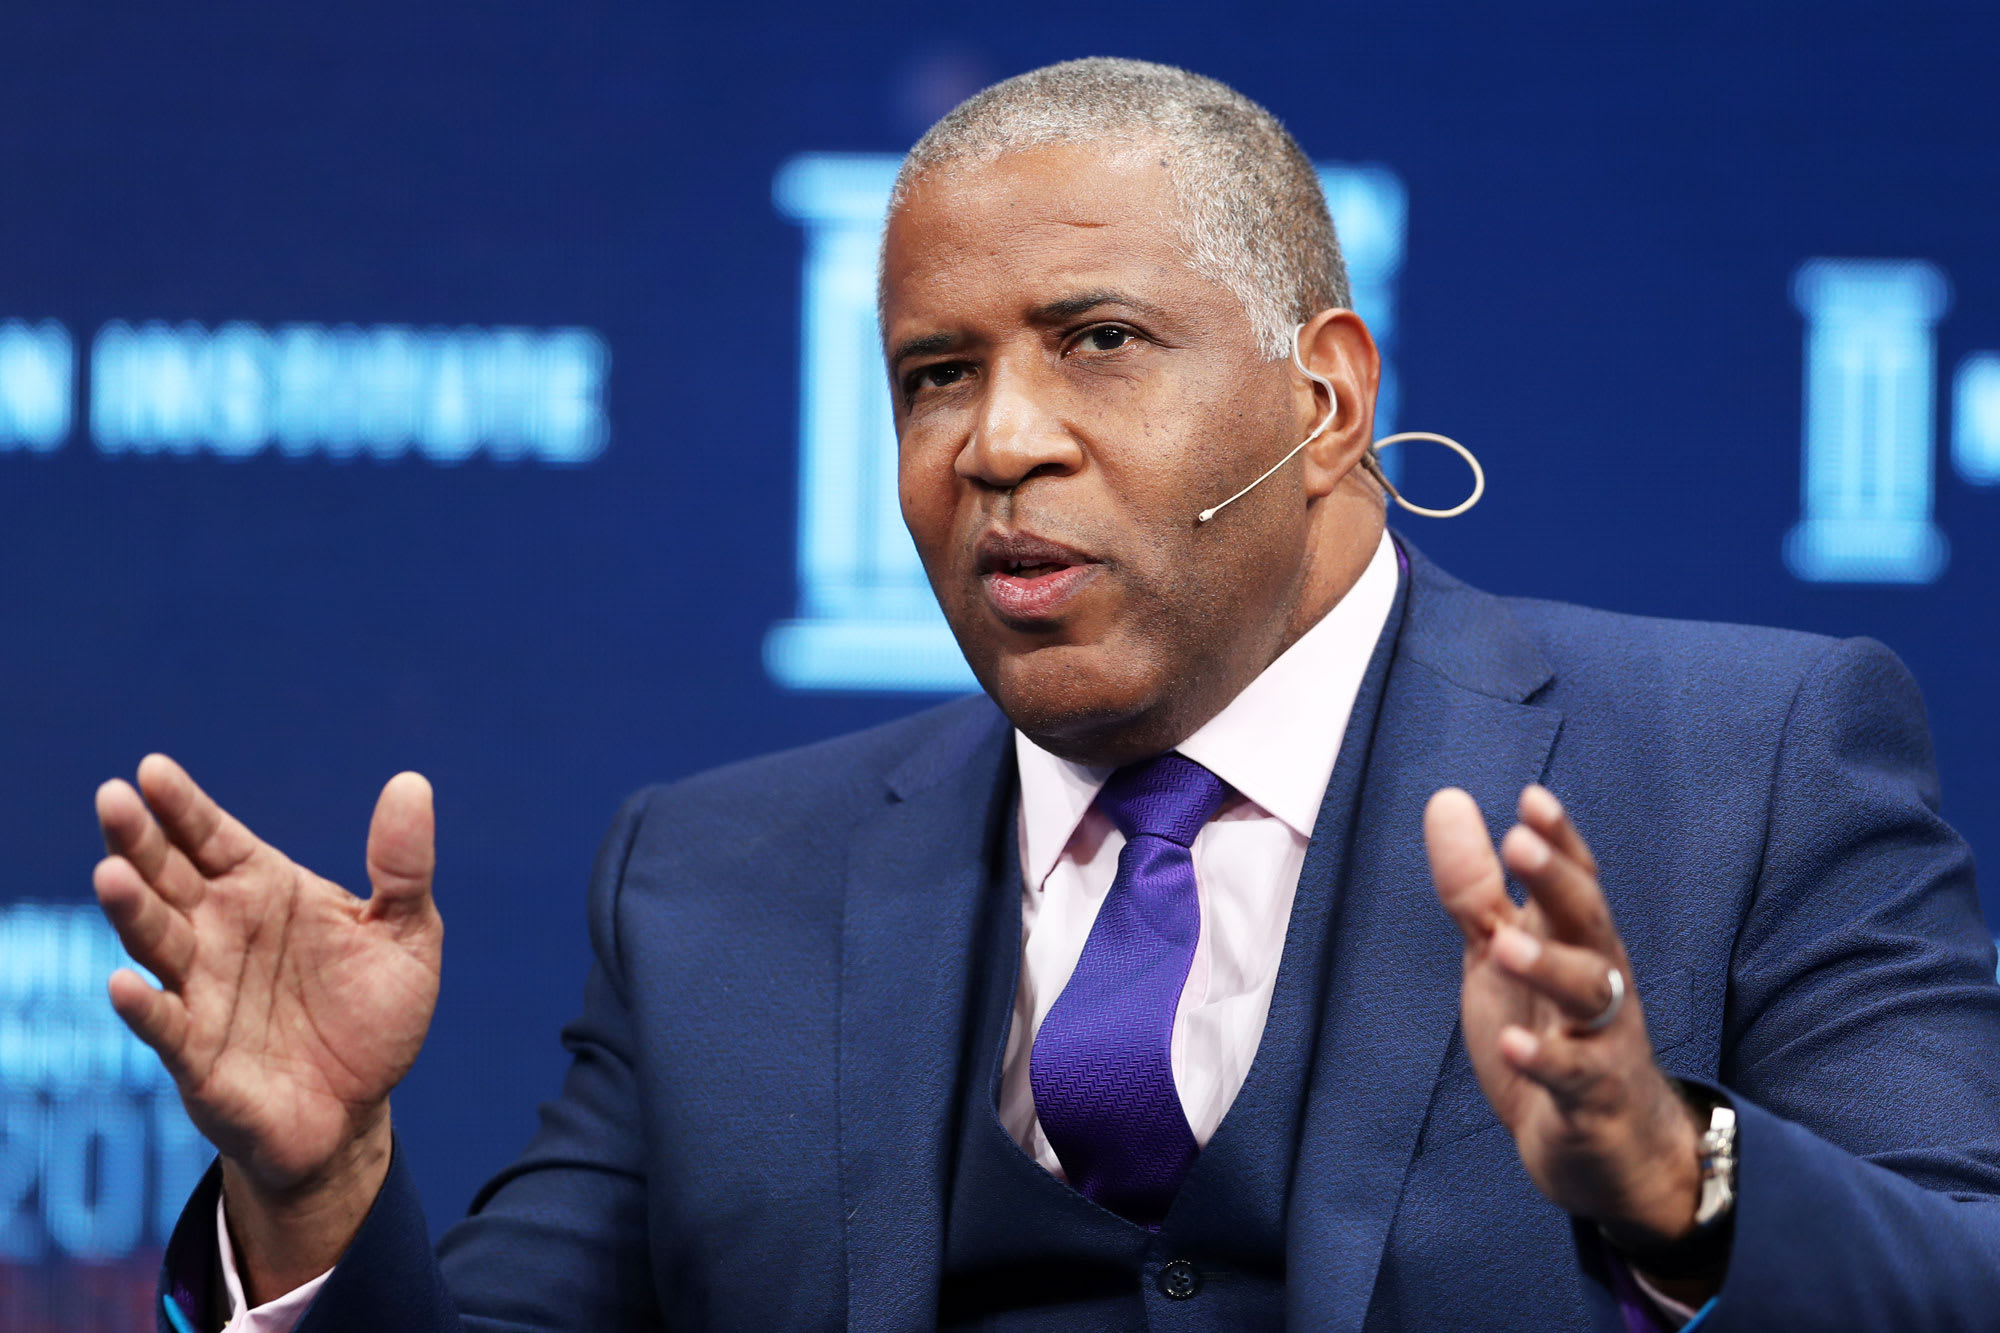 Billionaire Robert Smith says young people have to appreciate capitalism